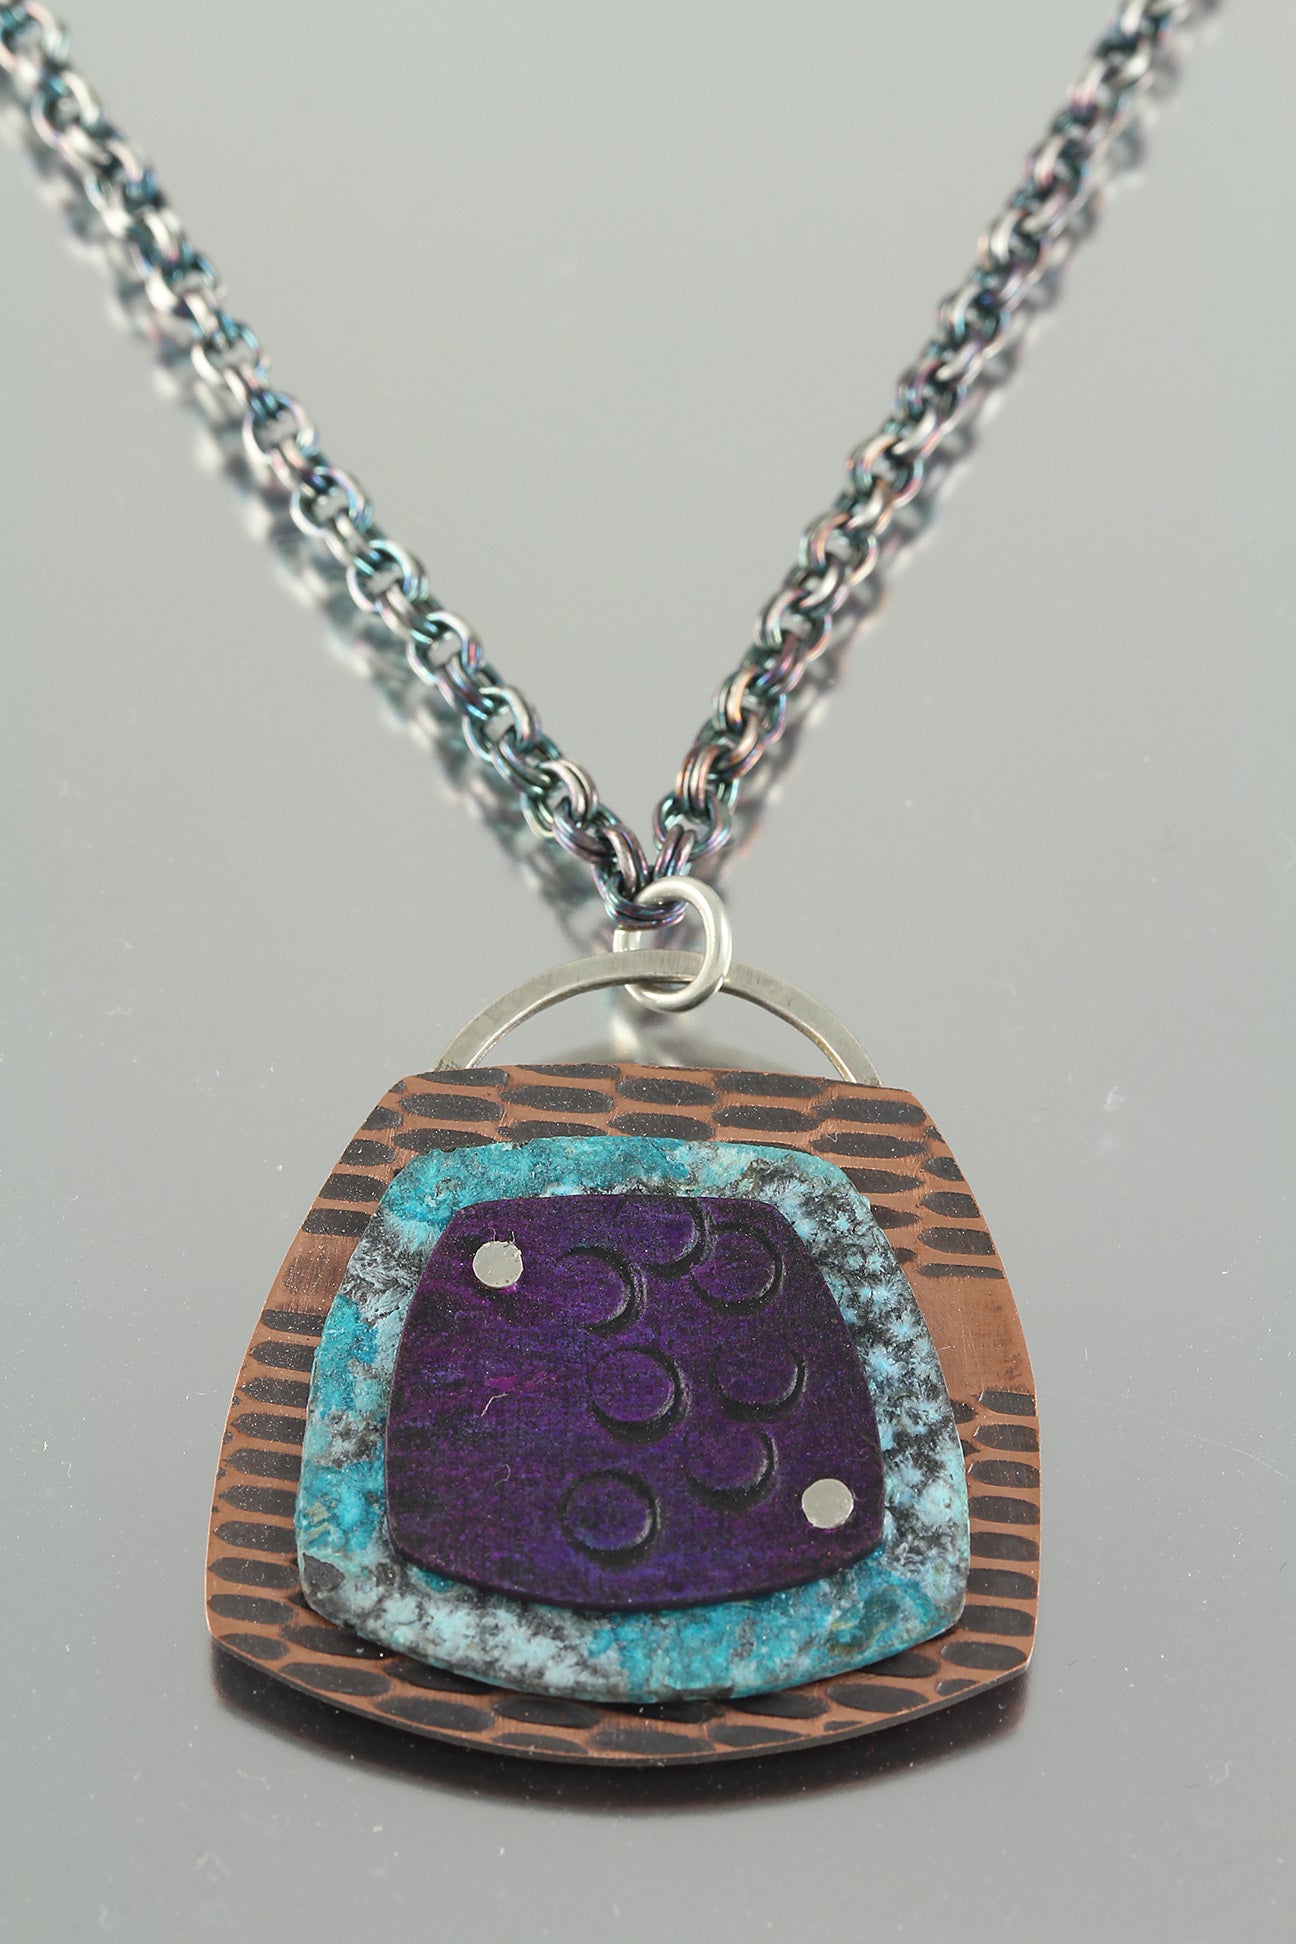 Patina 3-Layered Pendant: Antiqued Copper, Decoupage Blue and Purple